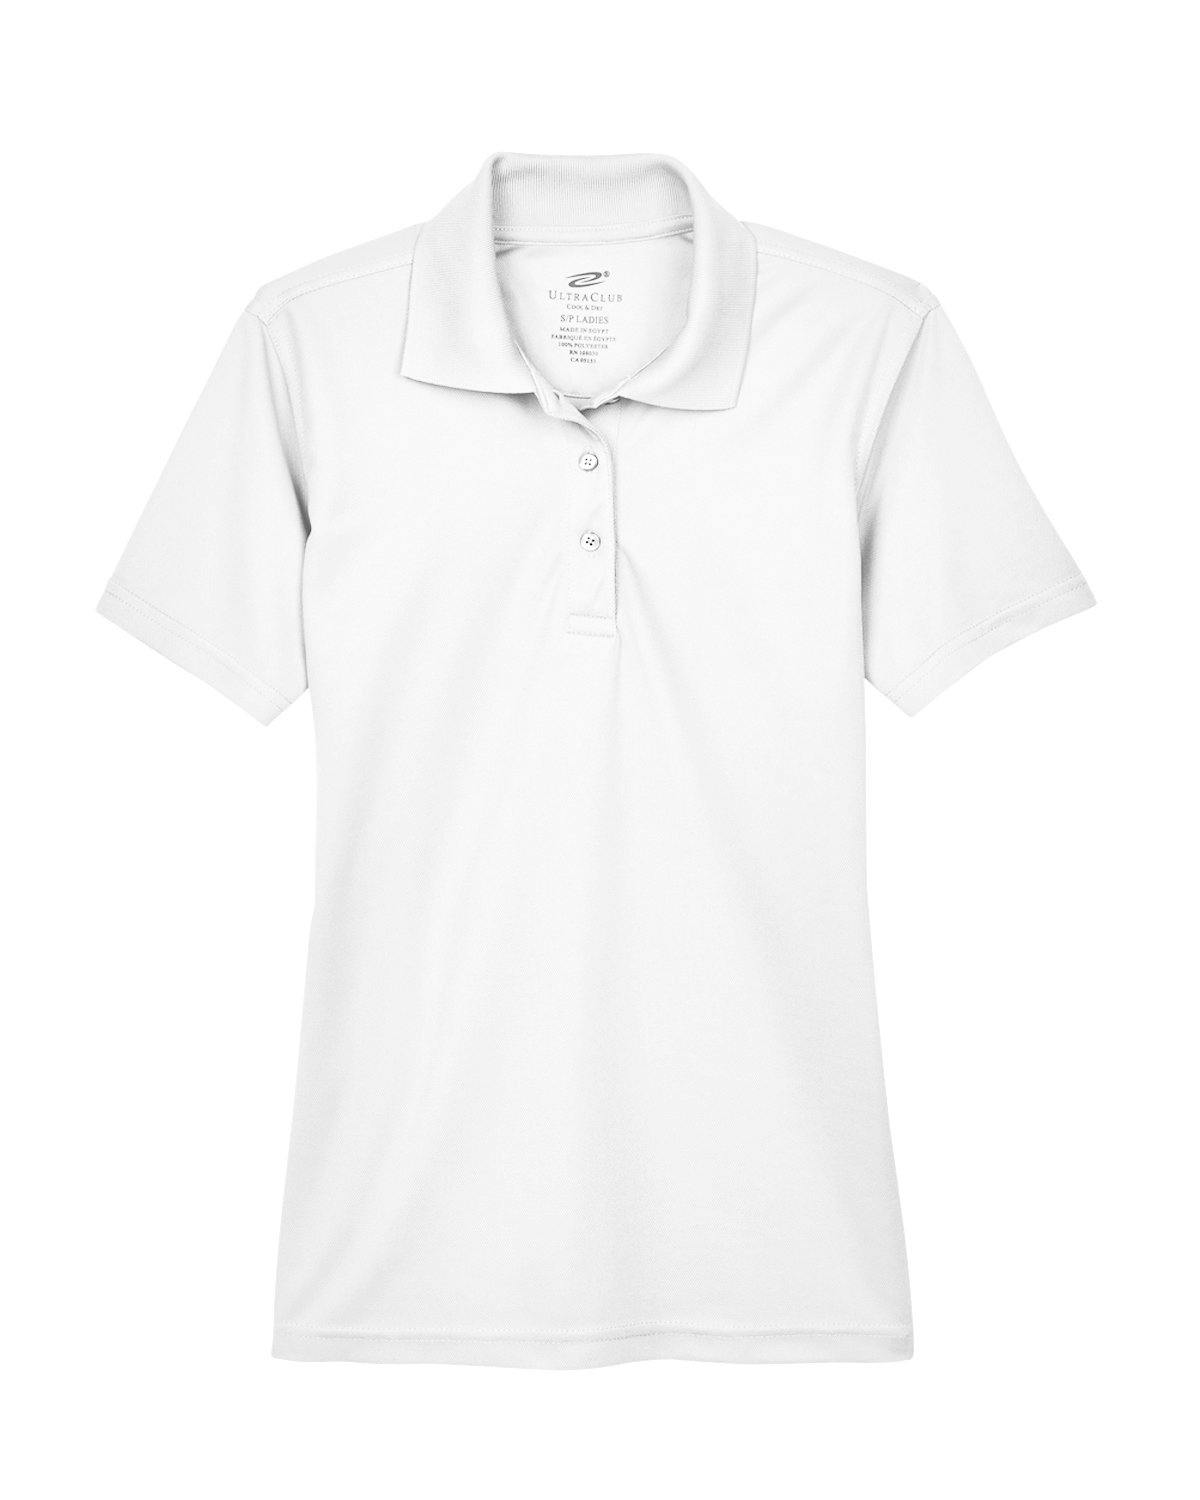 Image for Ladies' Cool & Dry Mesh Piqué Polo